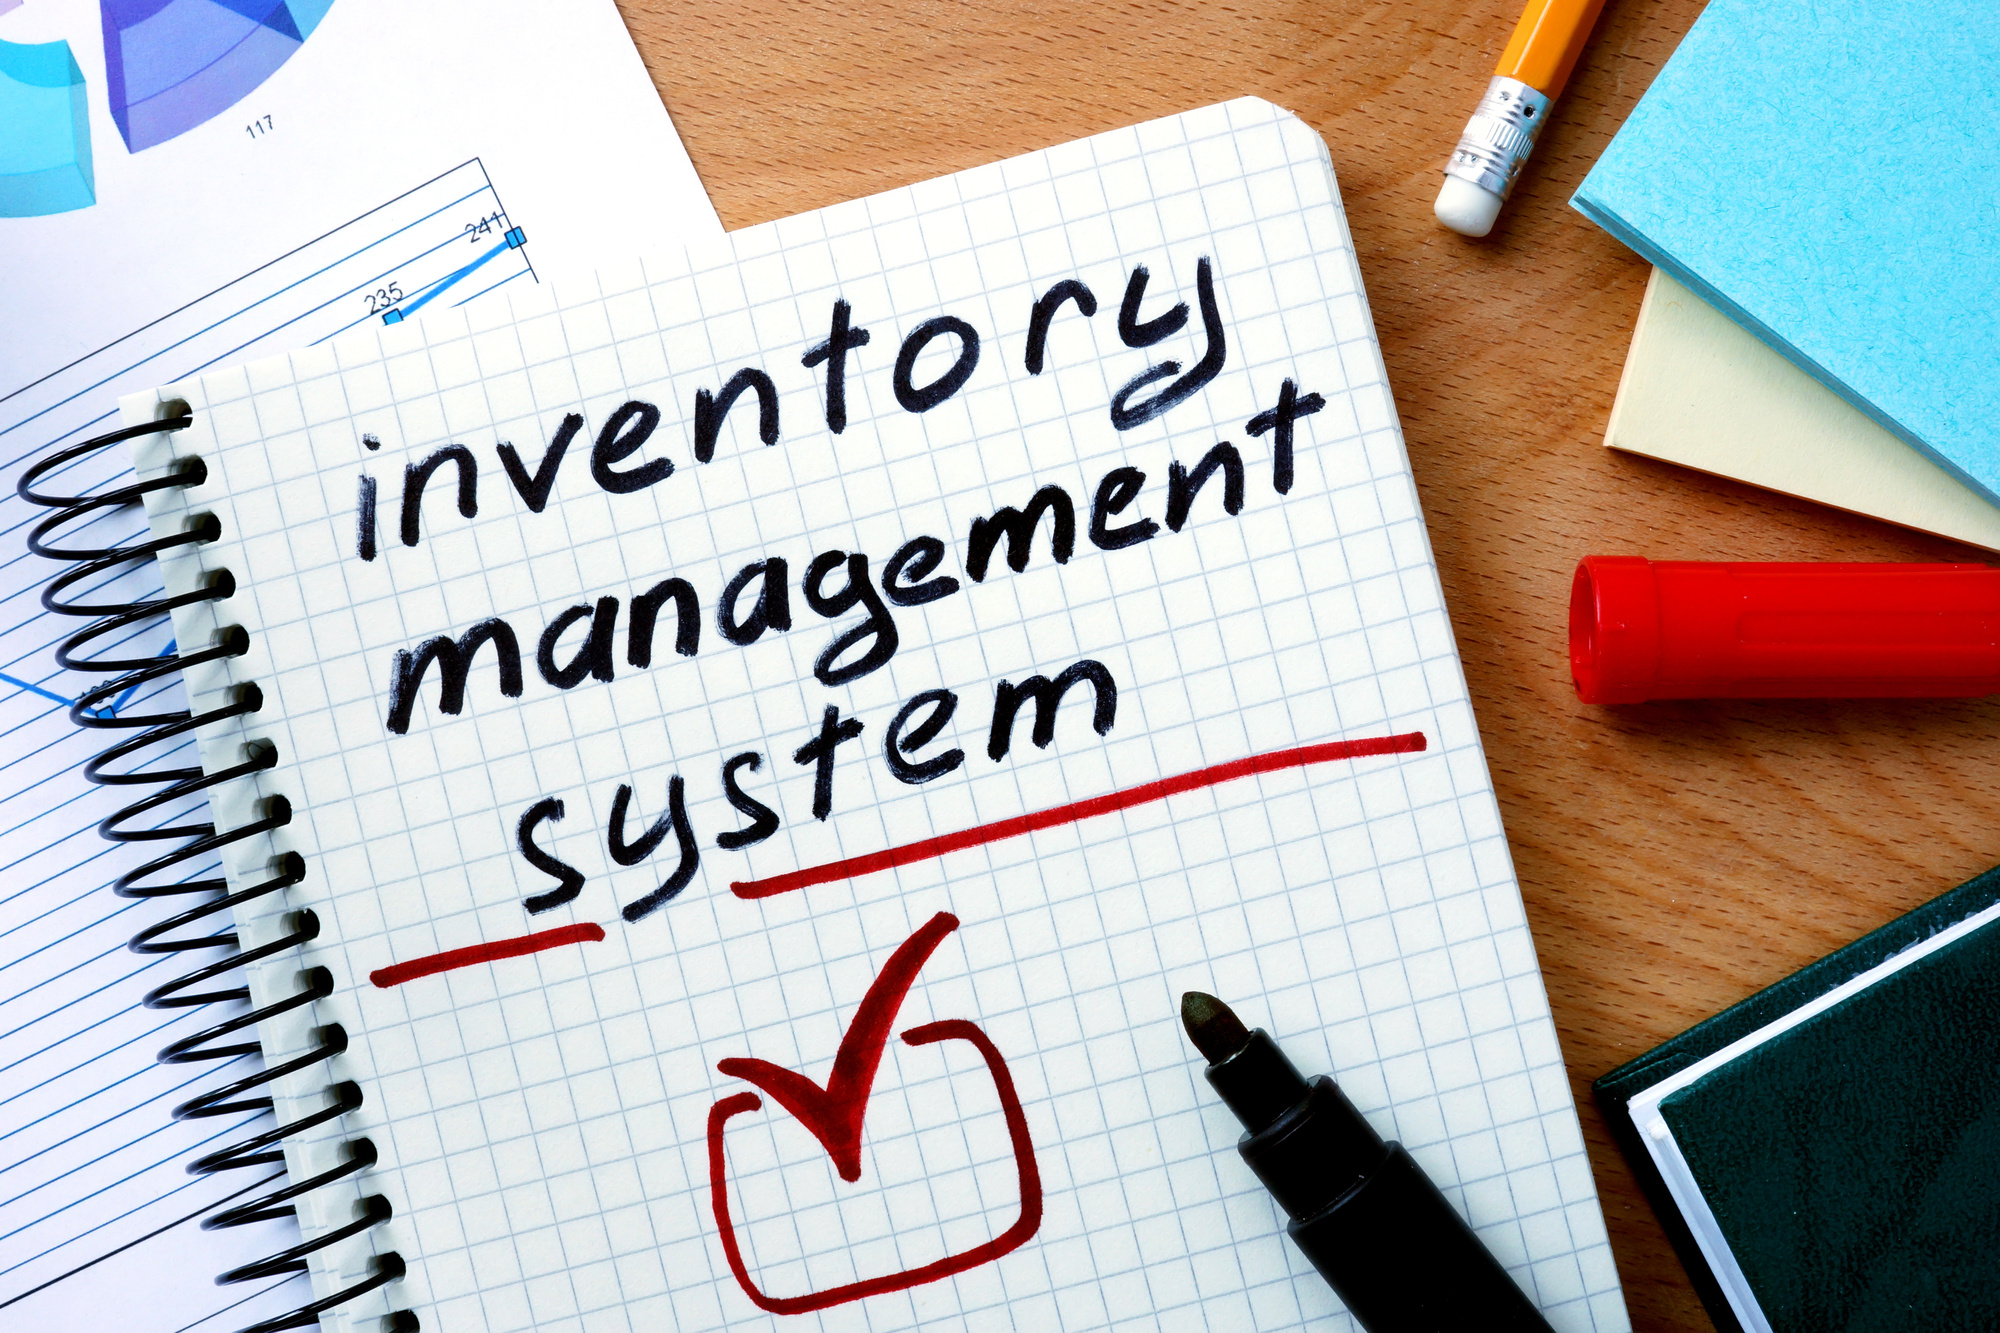 inventory management system written on a notepad